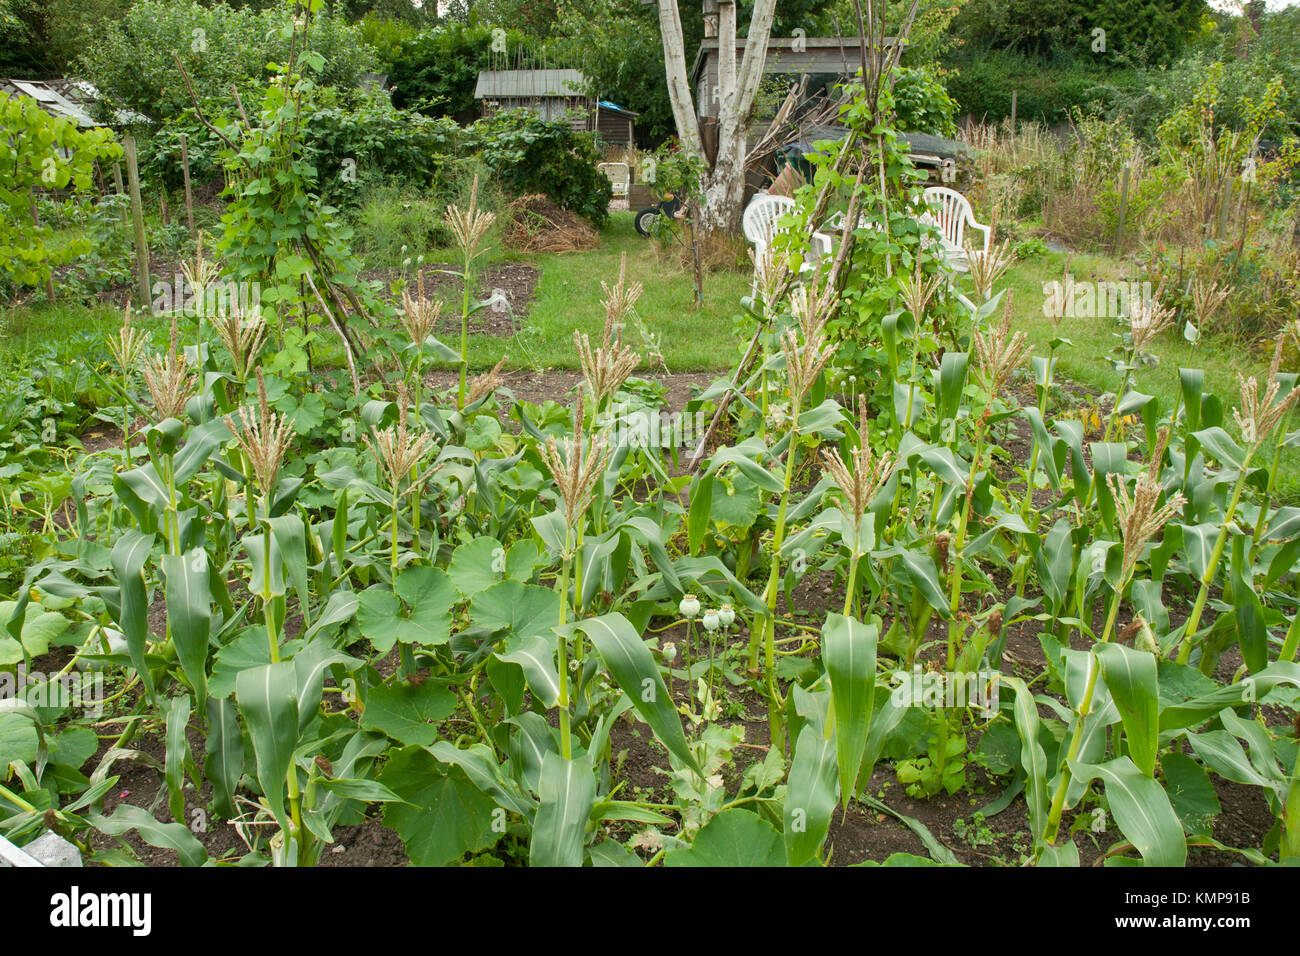 Allotment in summer. 'Three sisters' method with runner beans, sweet corn and squash grown together as complimentary crops. Stock Photo